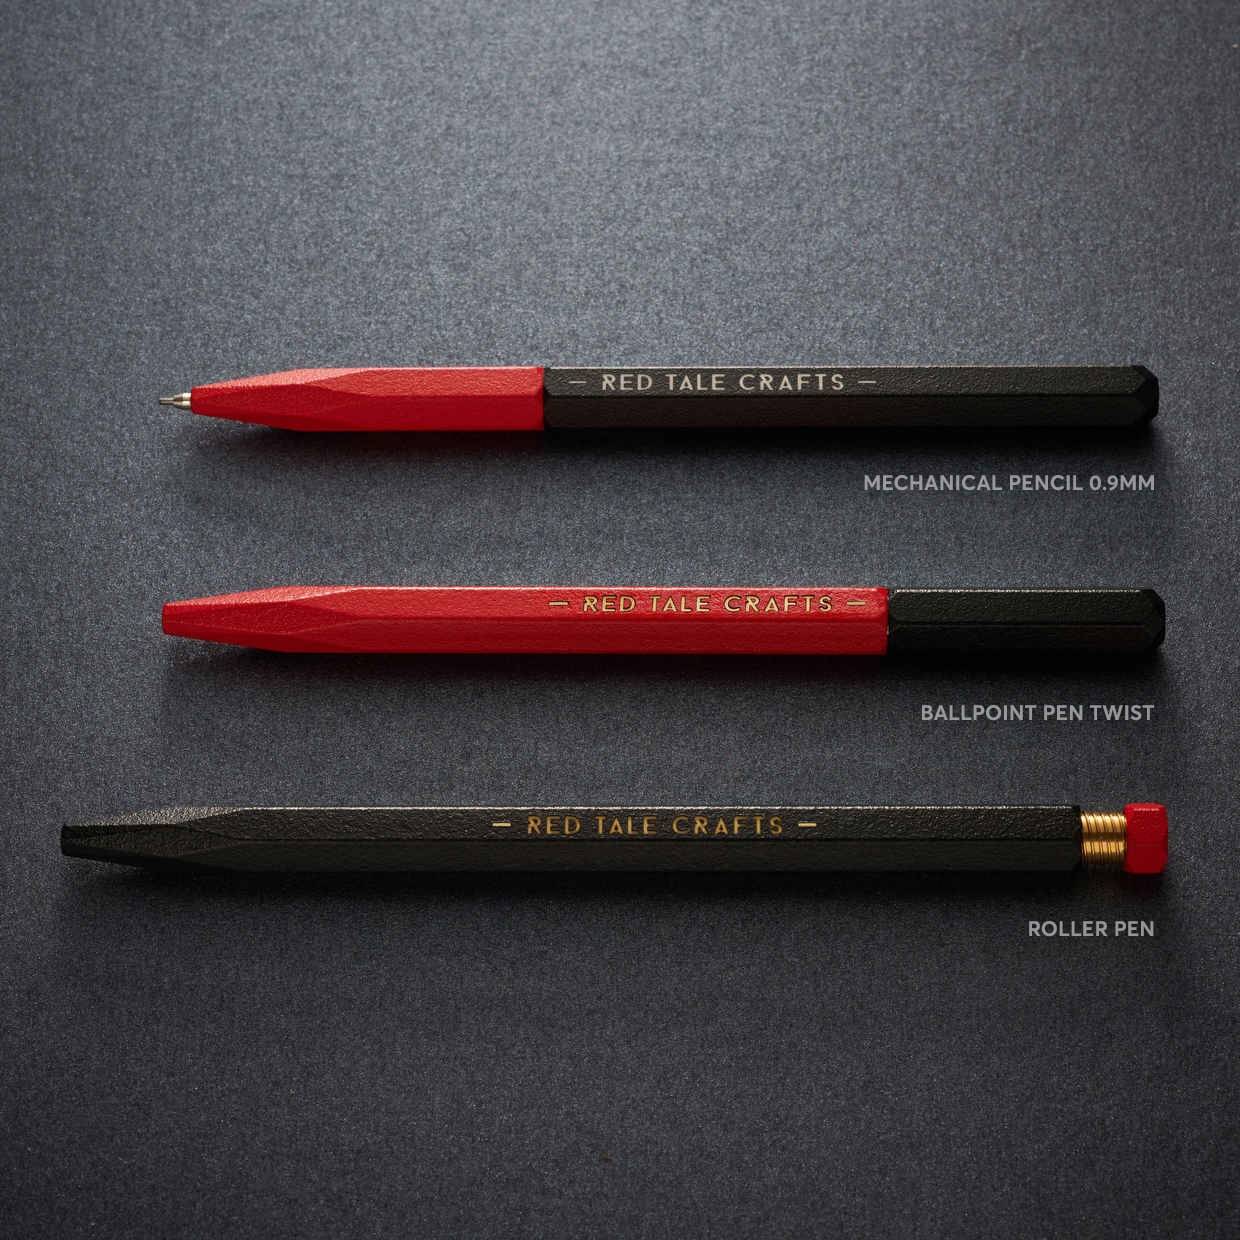 Red-Tale-writing-tools-Red-and-Black-coll002ection-45-1